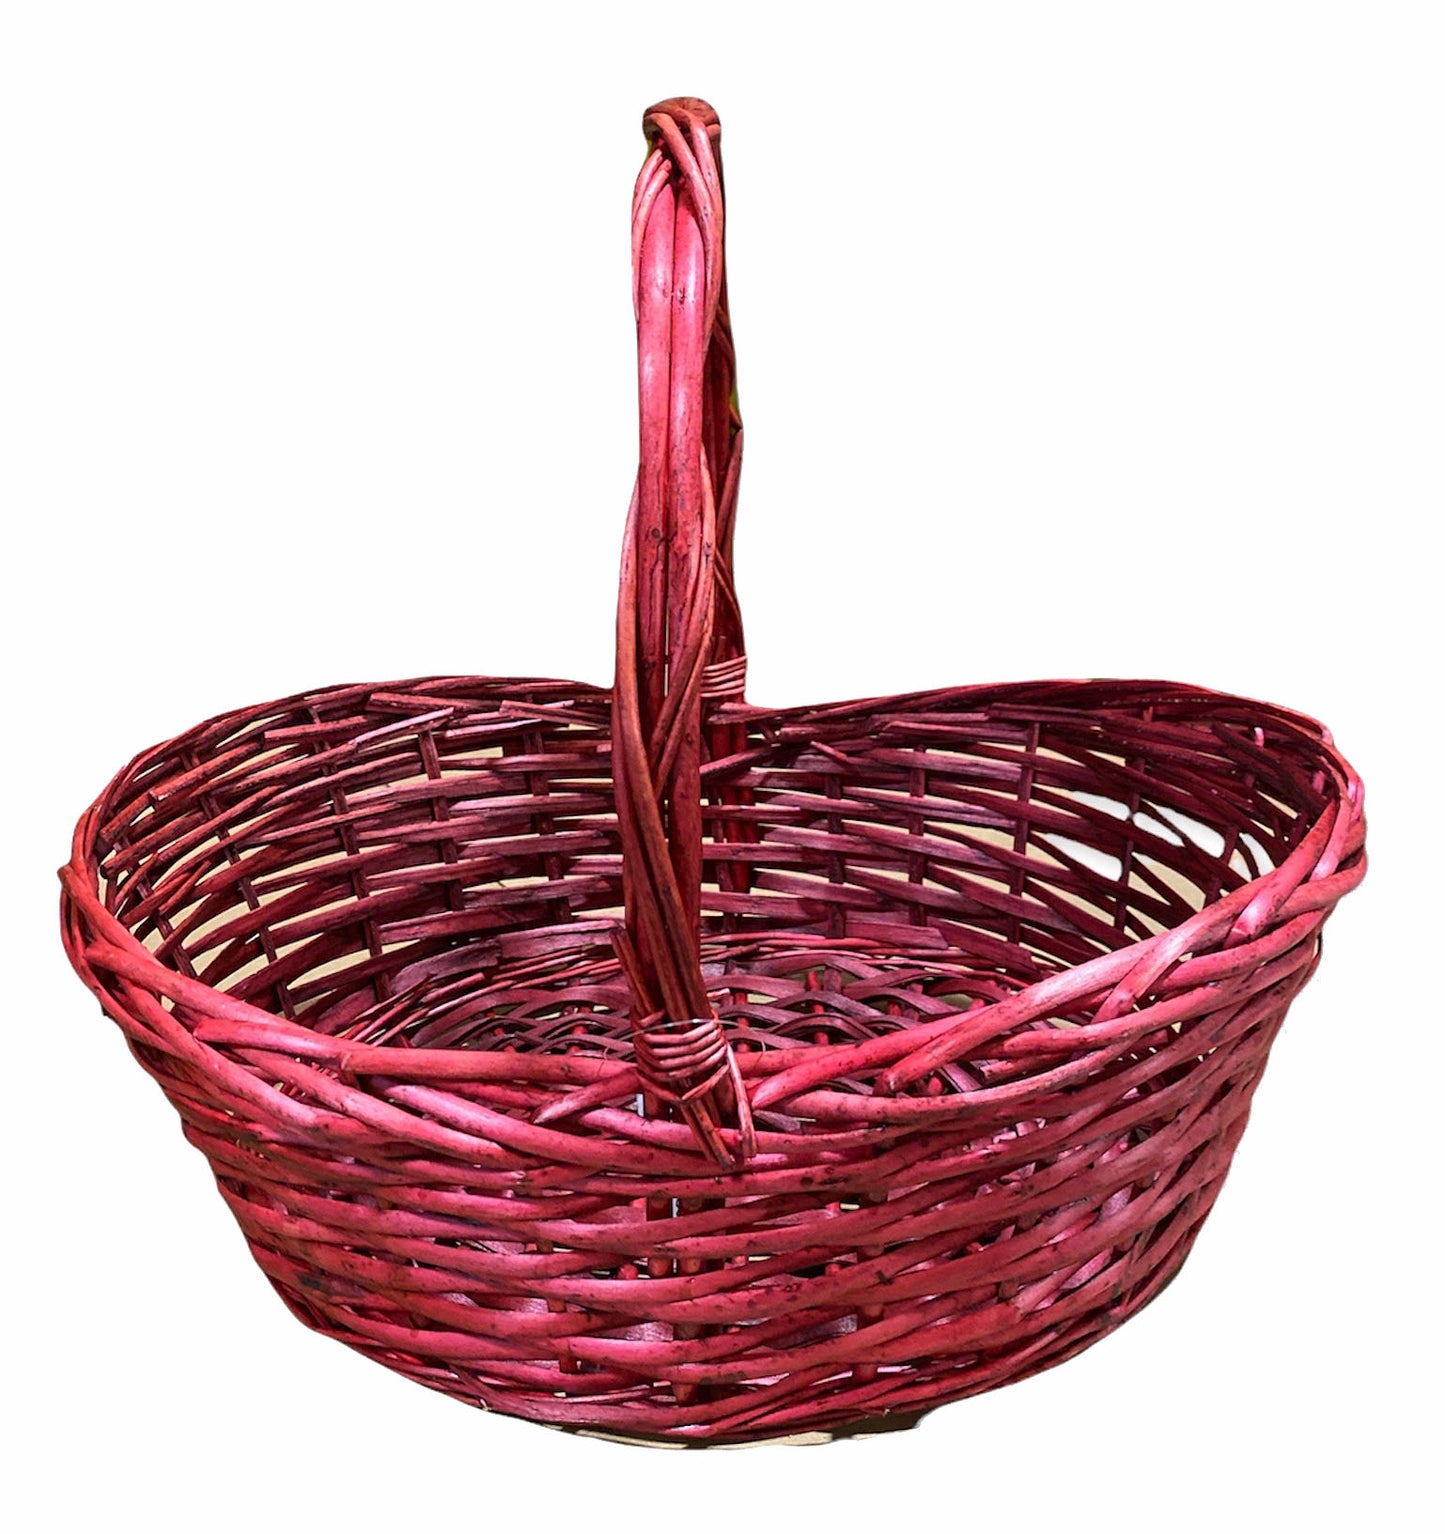 Oval Willow Baskets - Wine - LG - 17.5 x 12.5 x 5.5 x 16 inches